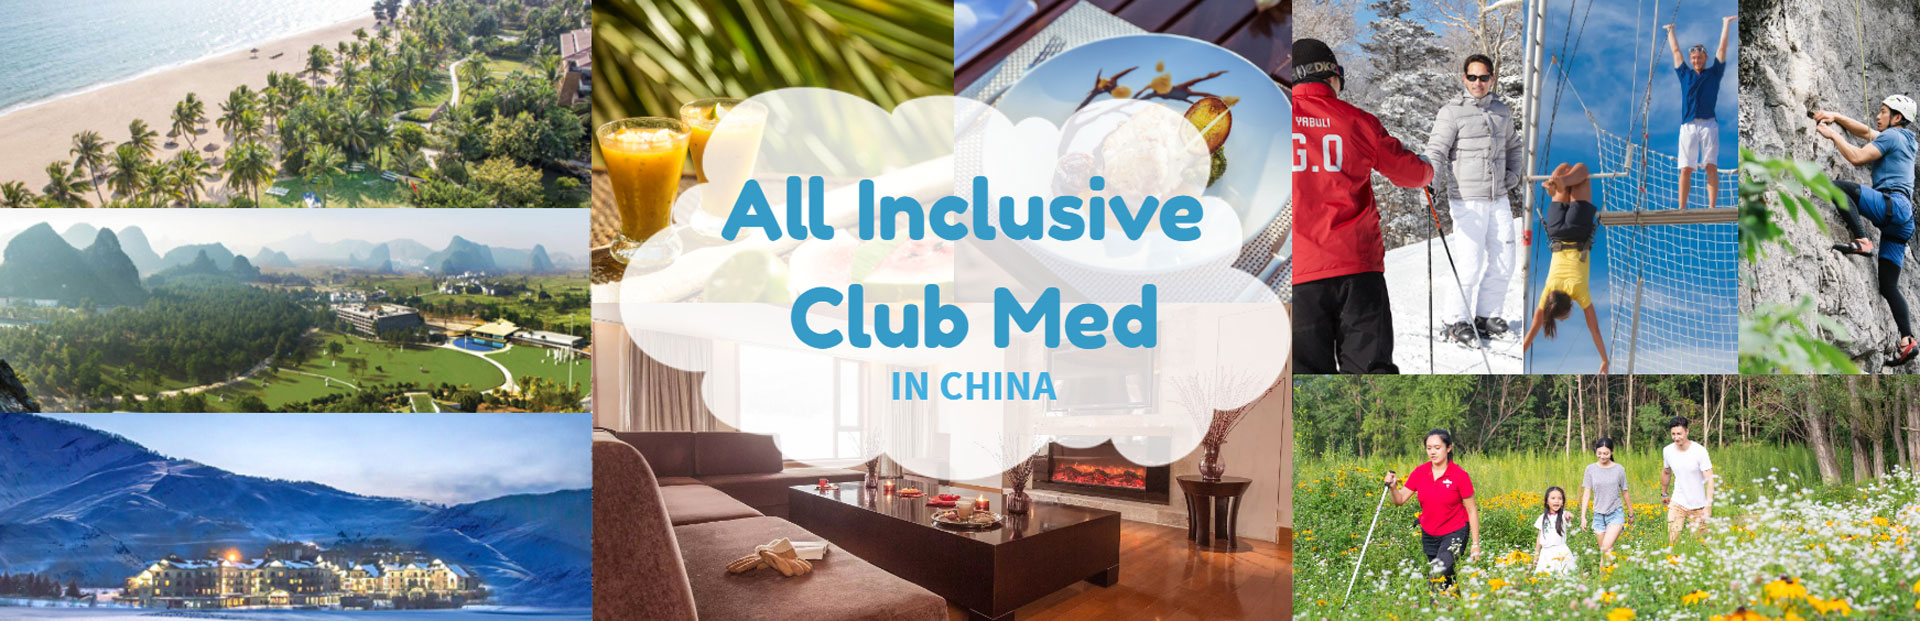 Club Med All Inclusive